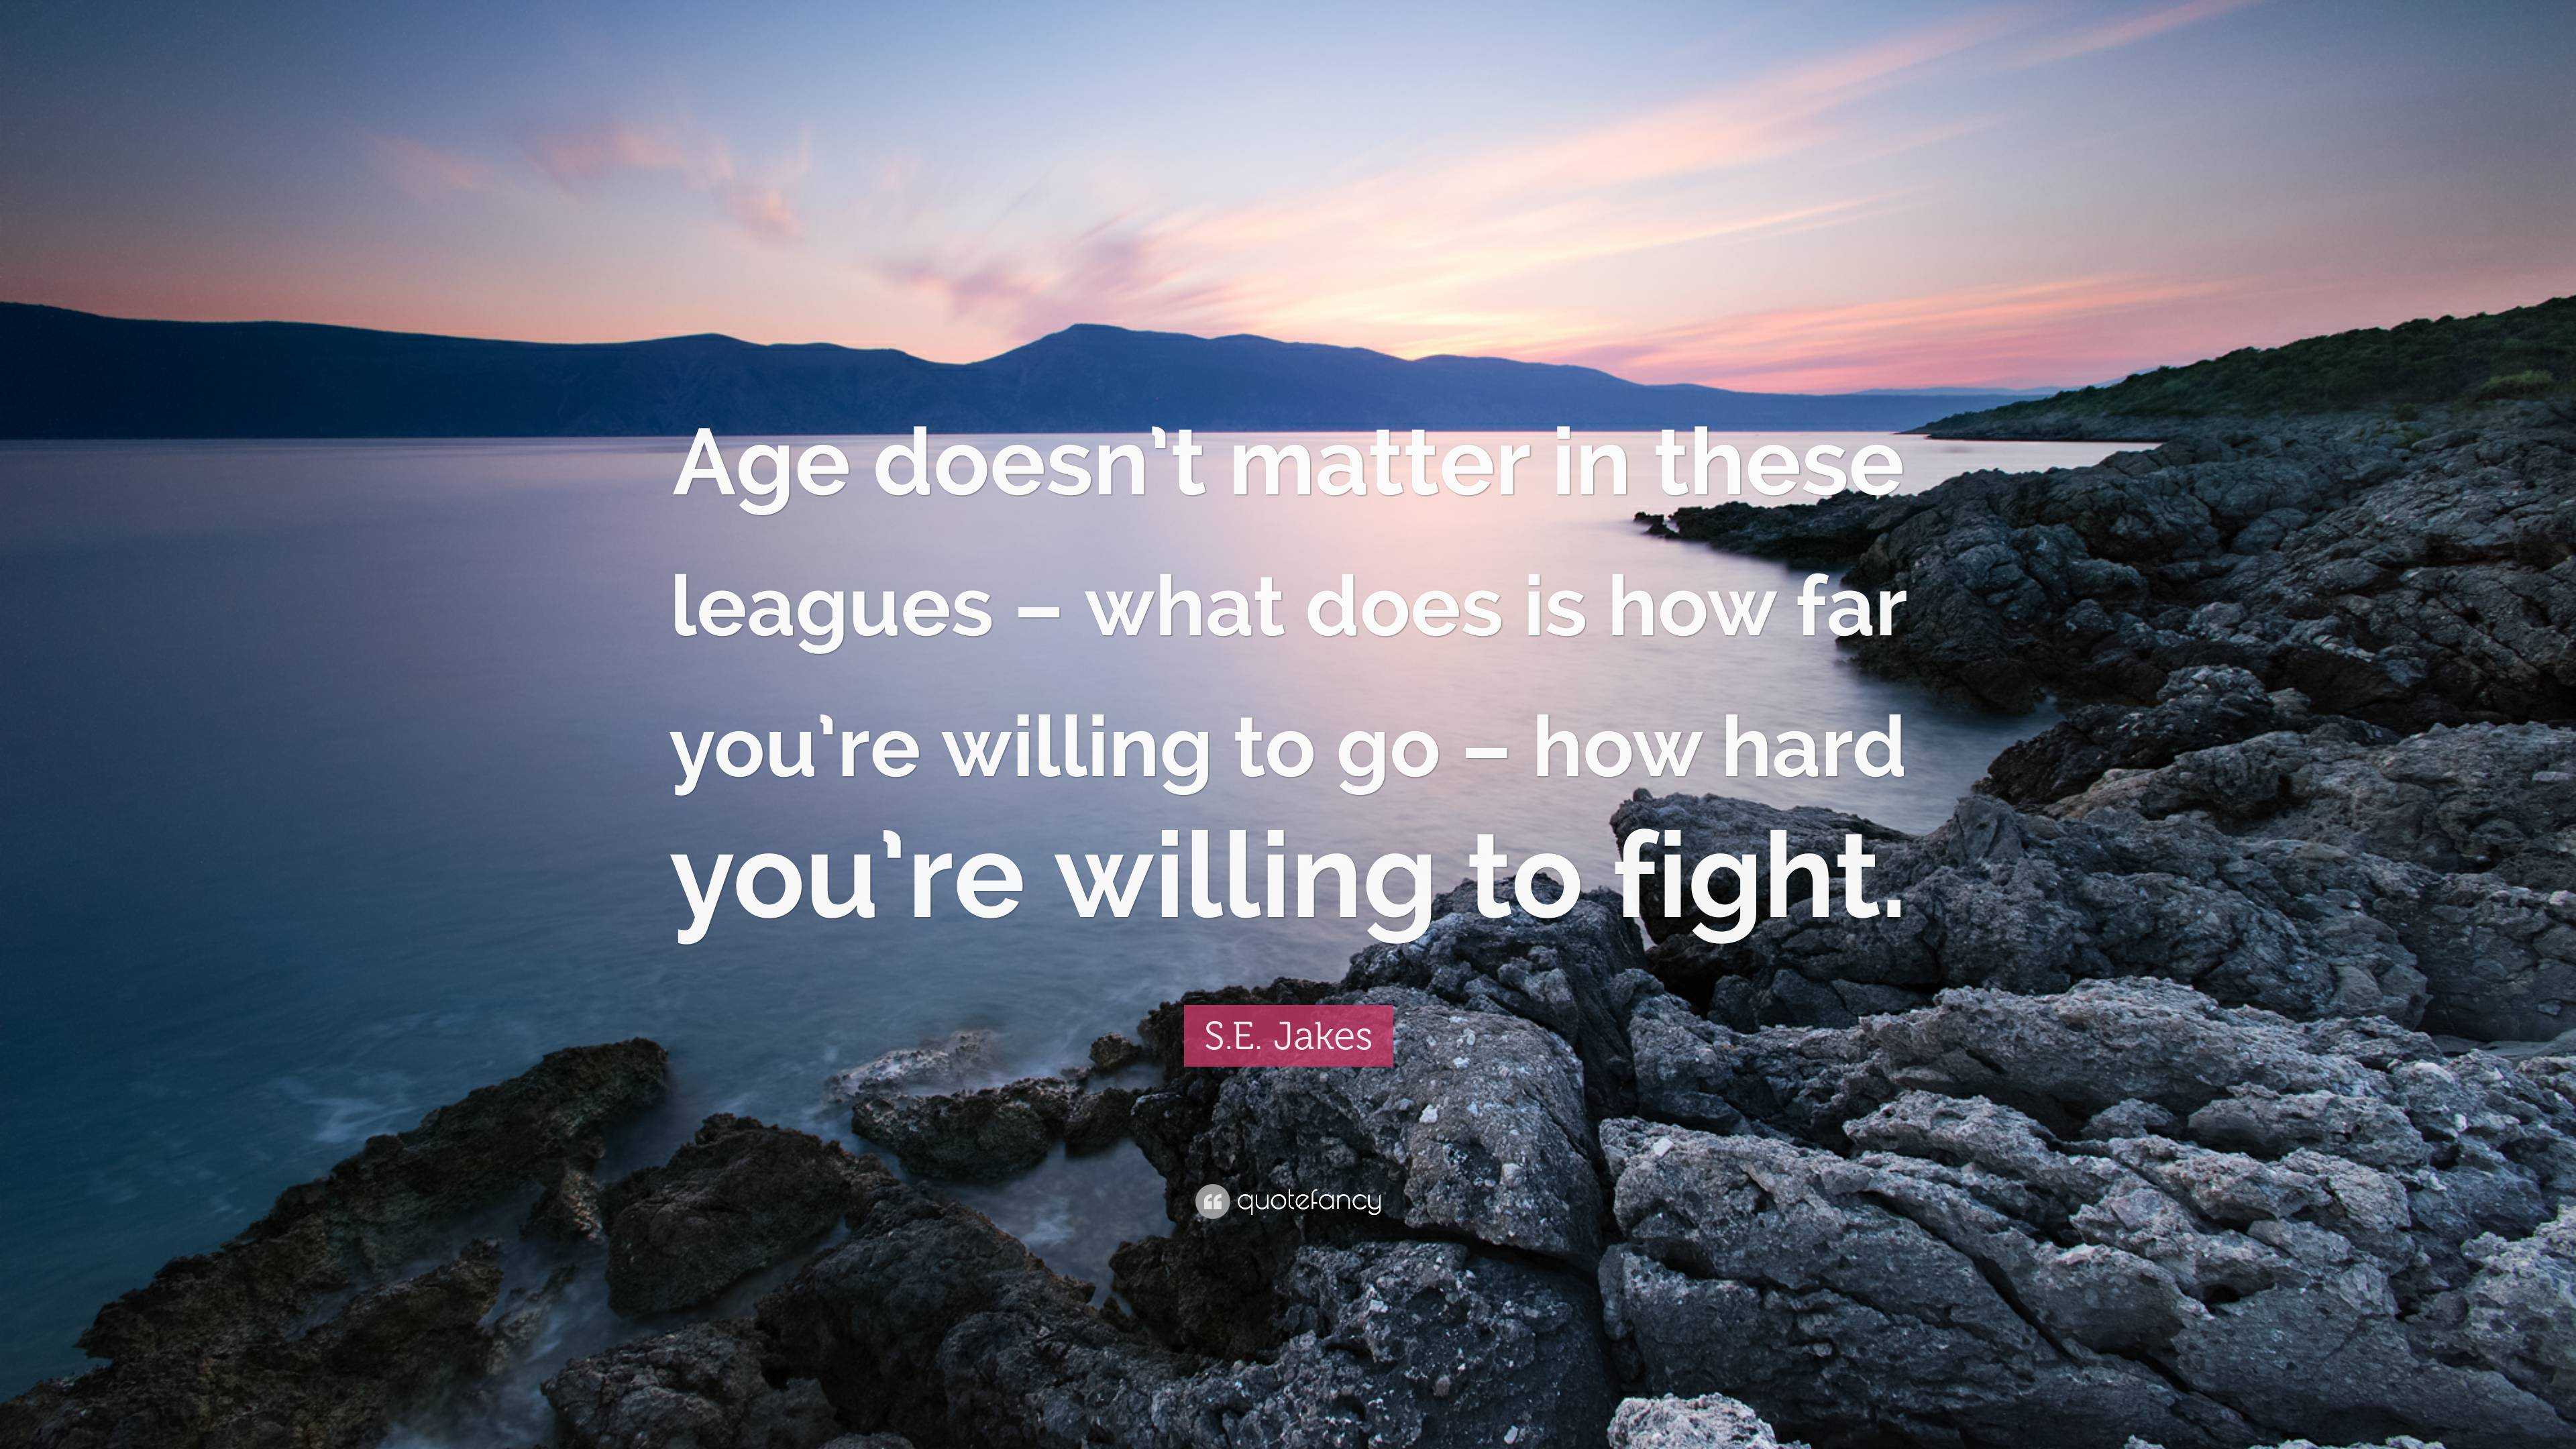 S.E. Jakes Quote: “Age doesn't matter in these leagues – what does is how  far you